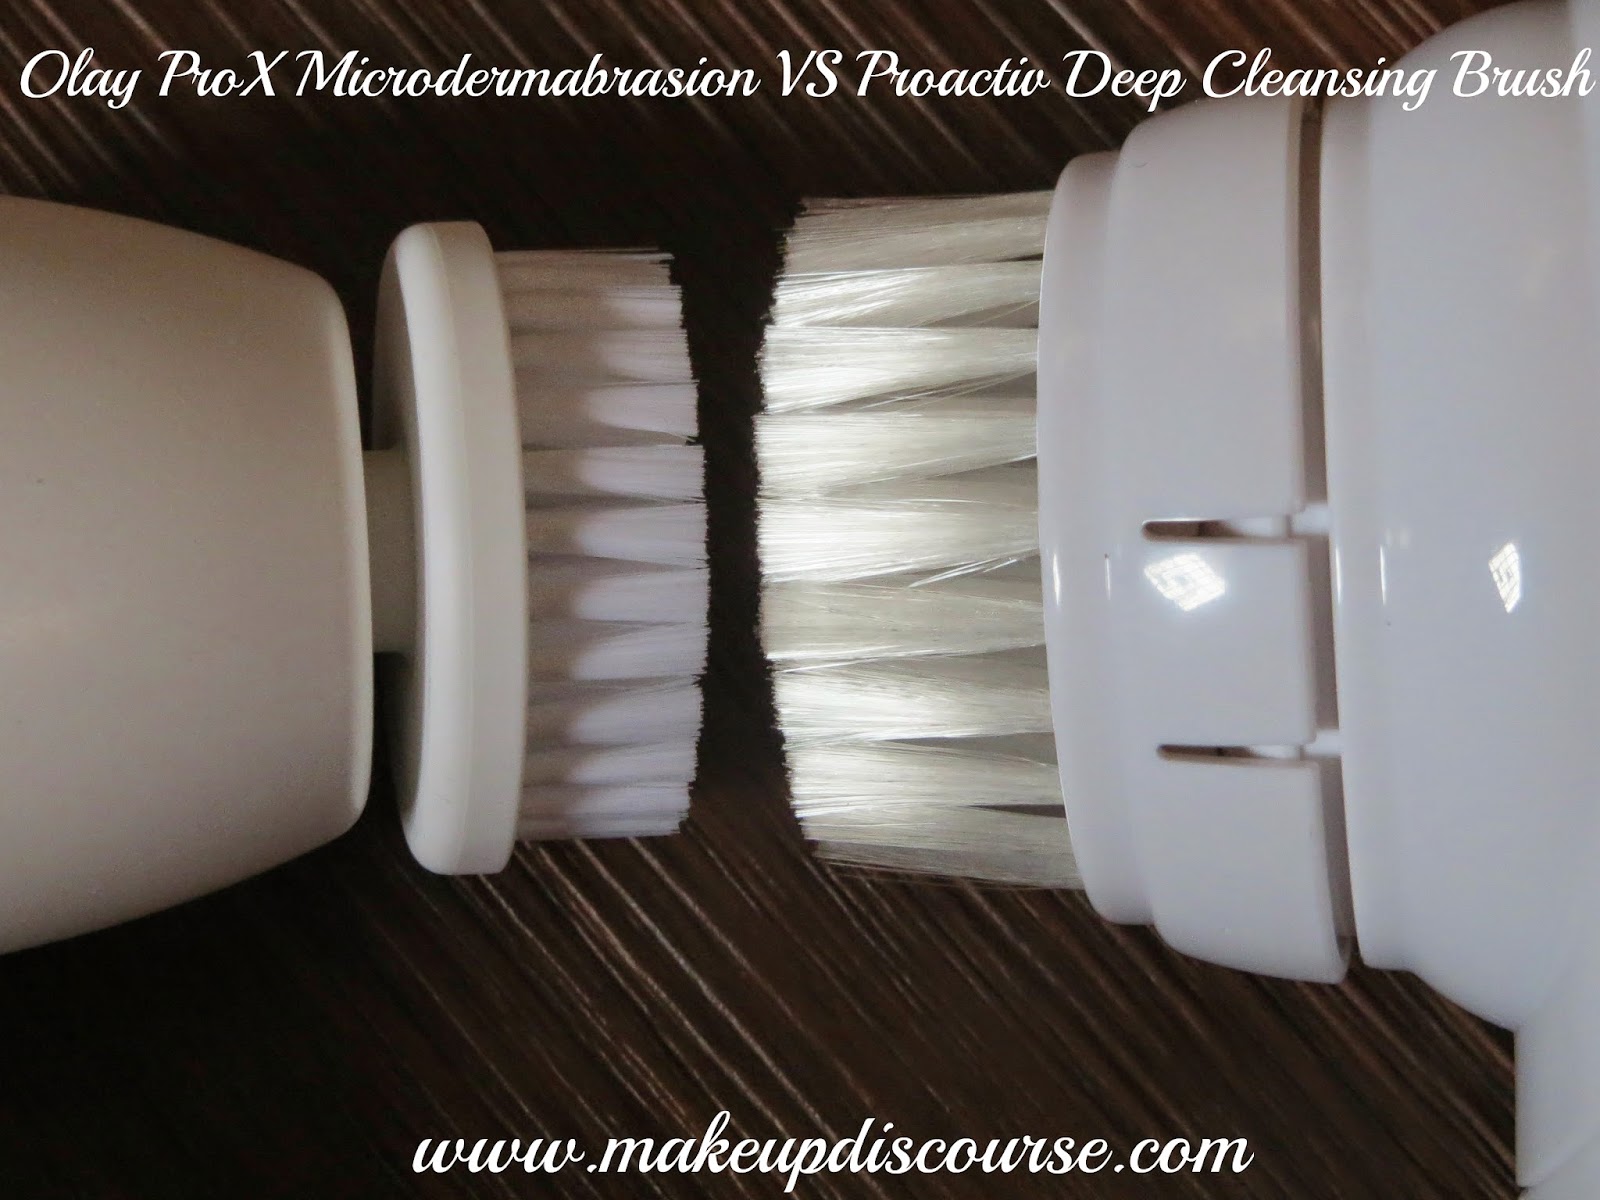 How to do Microdermabrasion at home